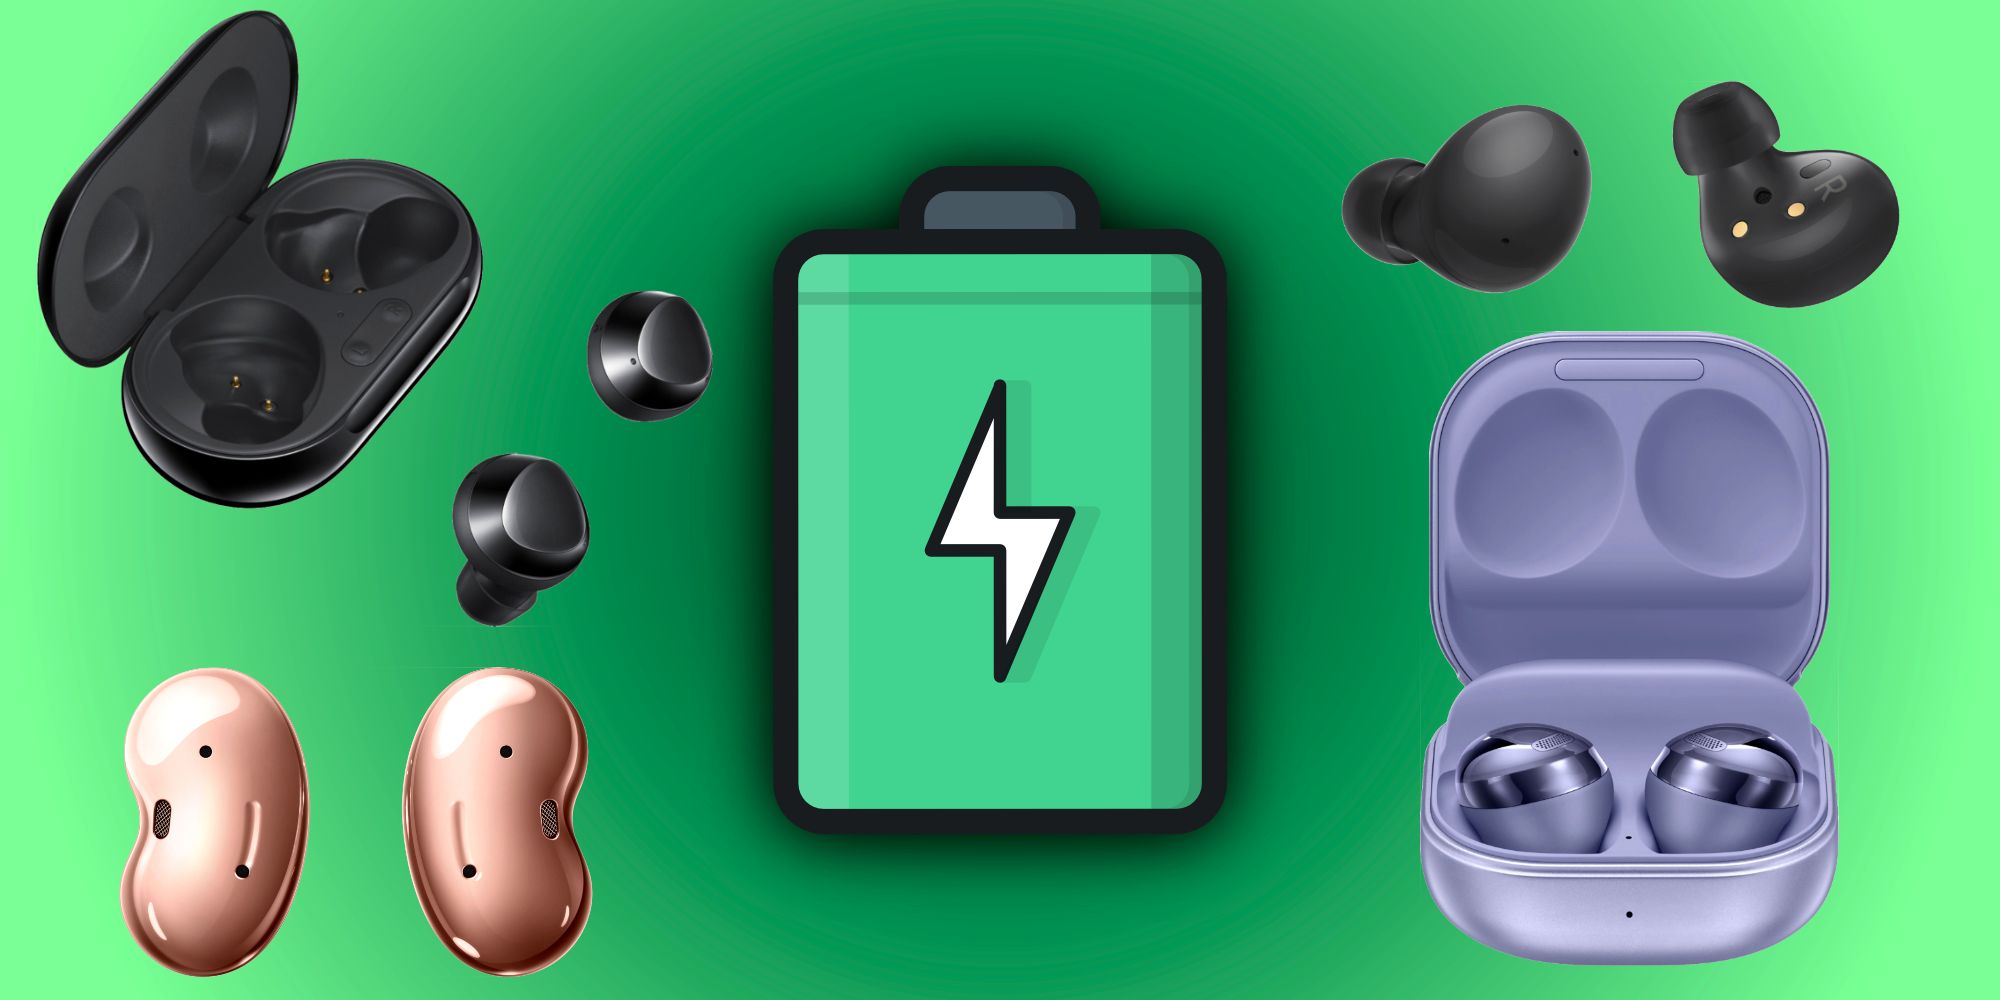 Samsung Galaxy Buds earbuds next to a battery icon